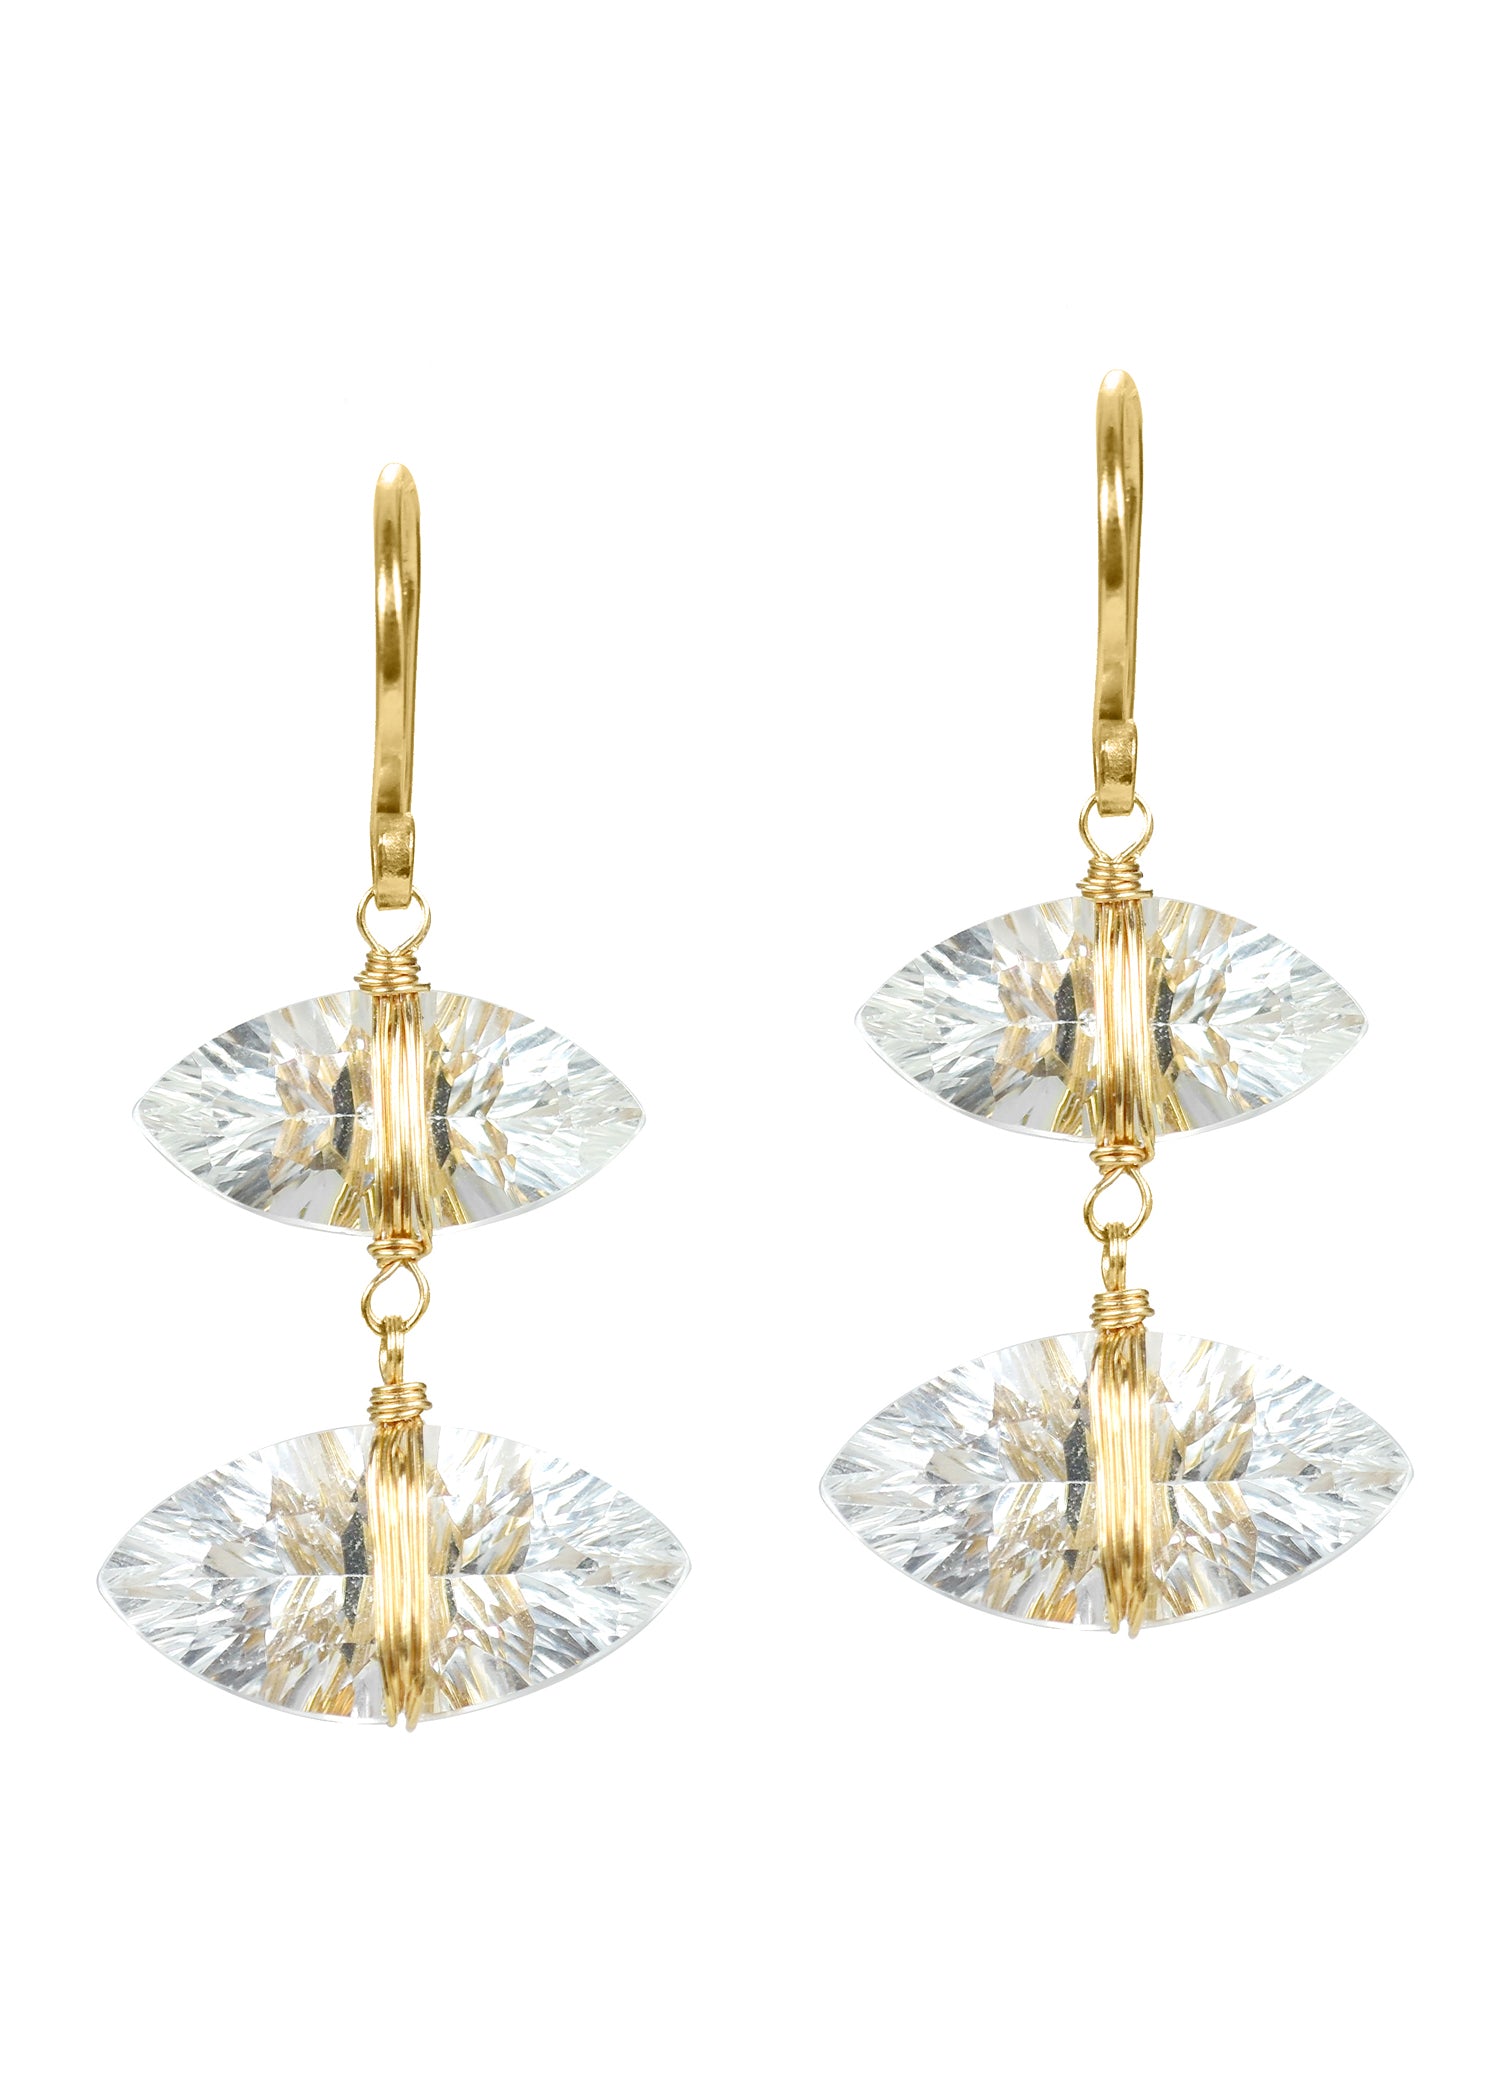 White Topaz 14k gold Earrings measure 1-5/16" in length (including the ear wires) and 5/8" in width at the widest point Handmade in our Los Angeles studio